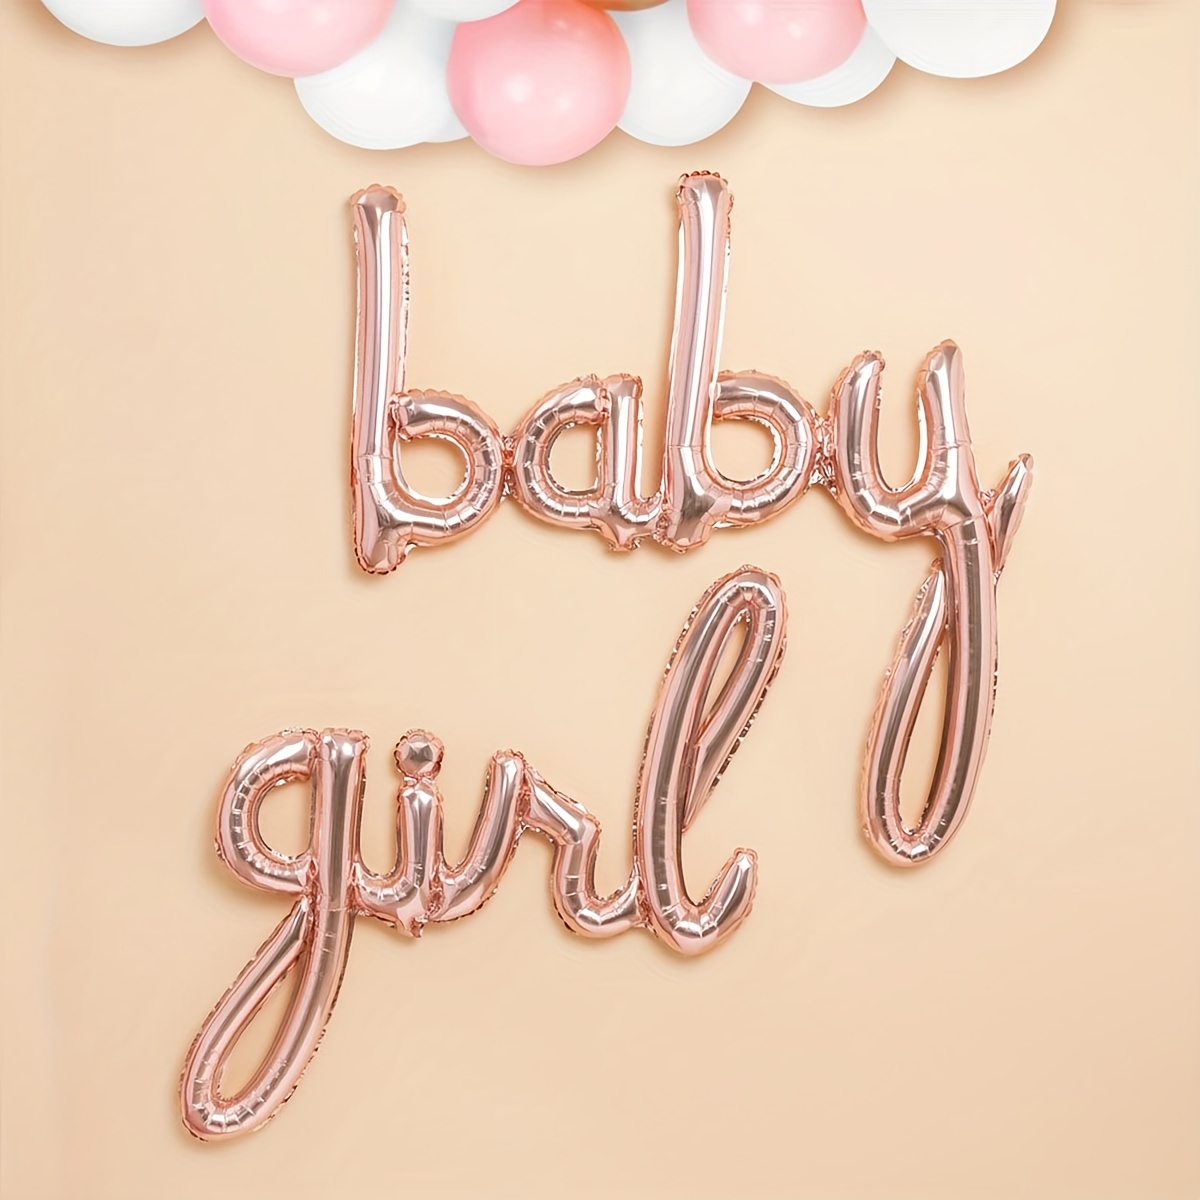 Baby Girl Letter Aluminum Foil Balloons, Welcome Baby Party